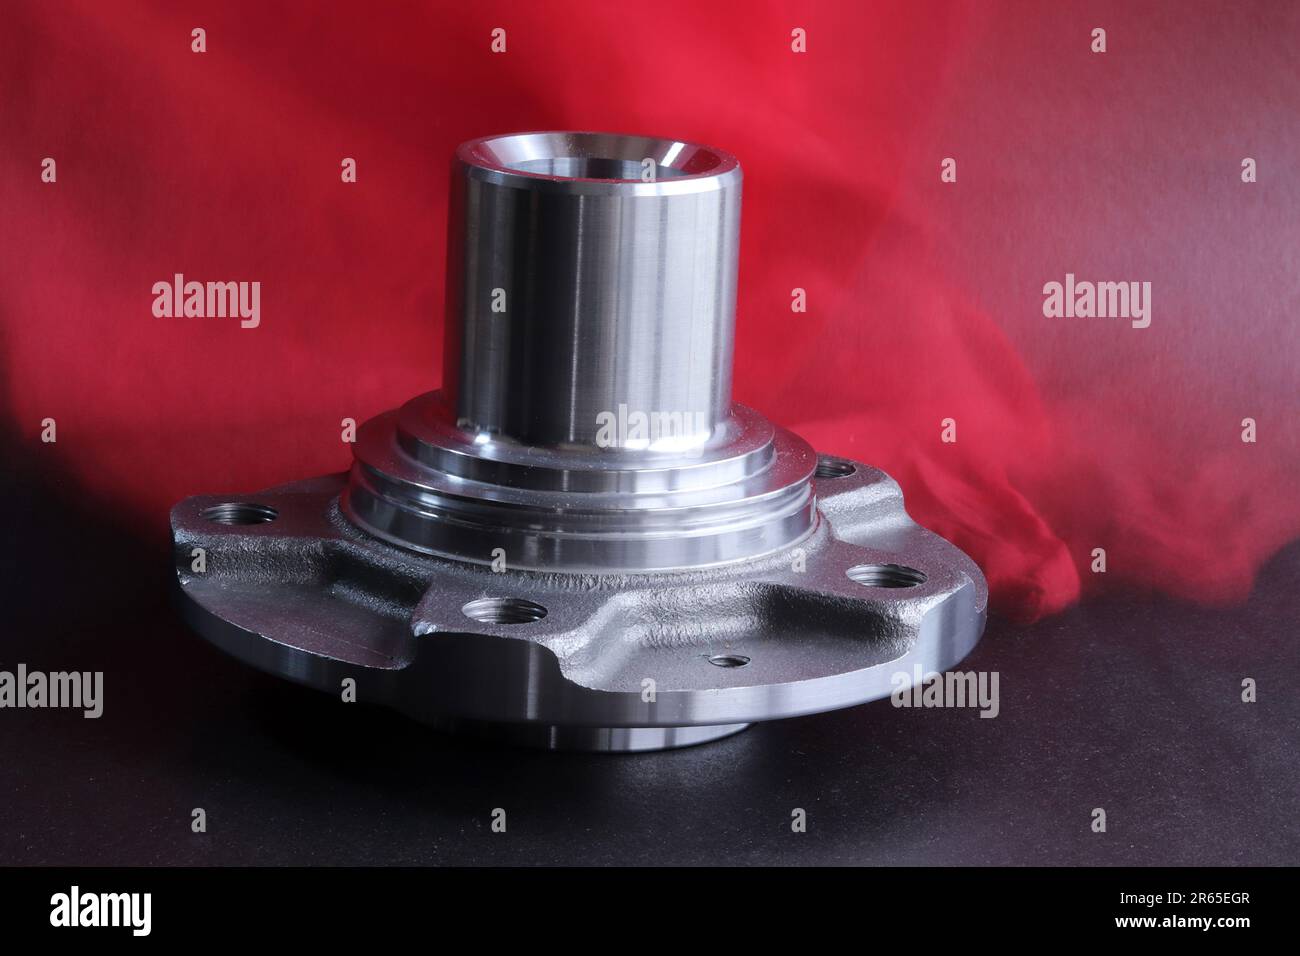 Automotive spare parts. Industrial background. Stock Photo